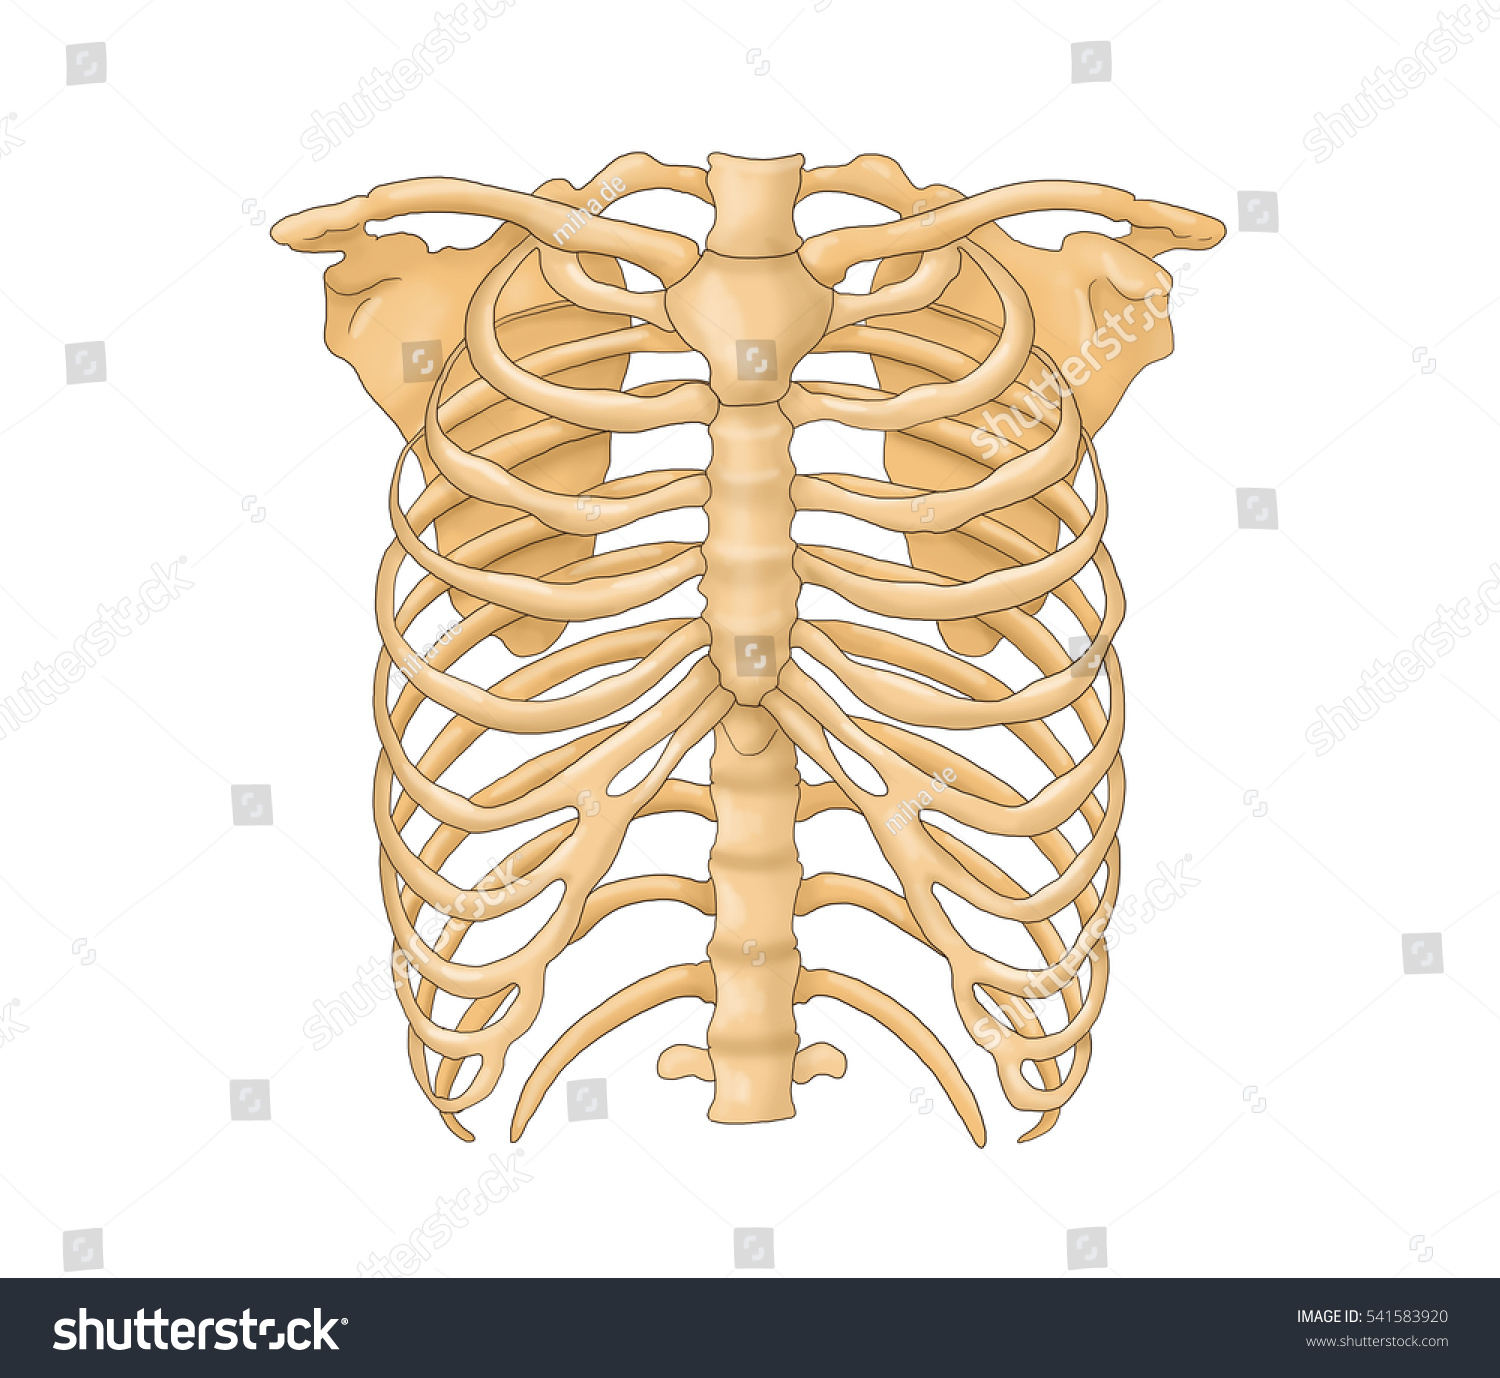 Thoracic Cage Thoracic Bones Stock Illustration 541583920 | Shutterstock